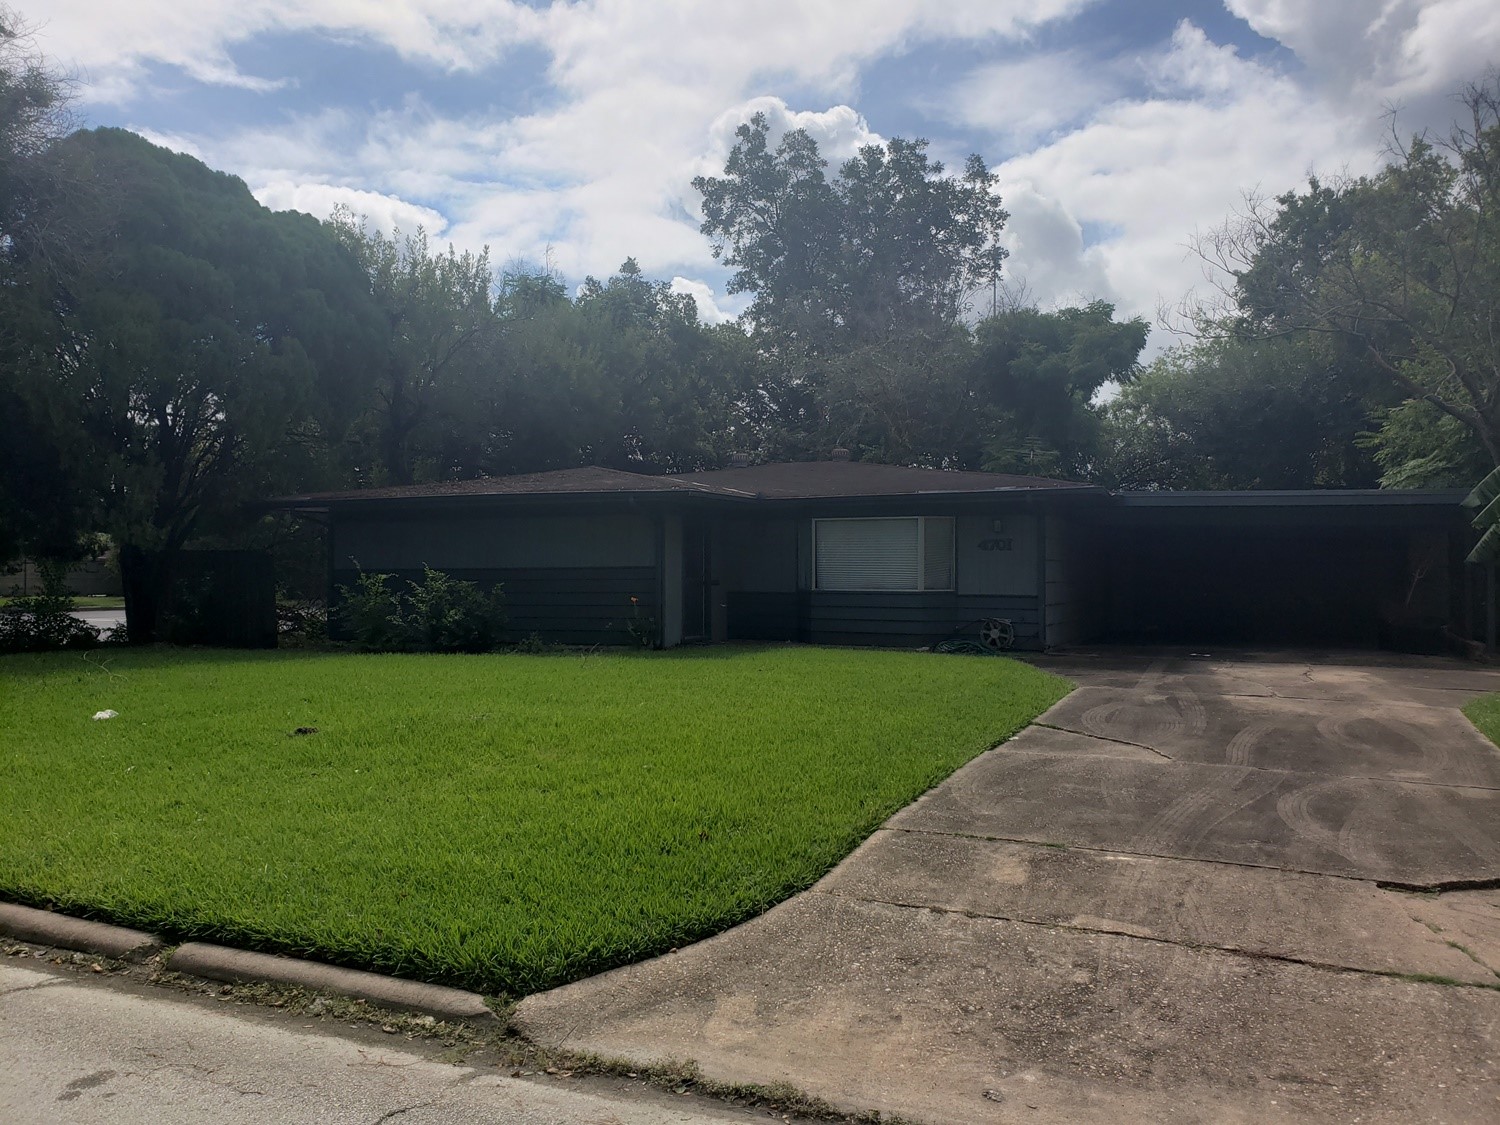 4701 Holly Street , Bellaire, TX, 77401 | 11579873 | Realty Texas LLC